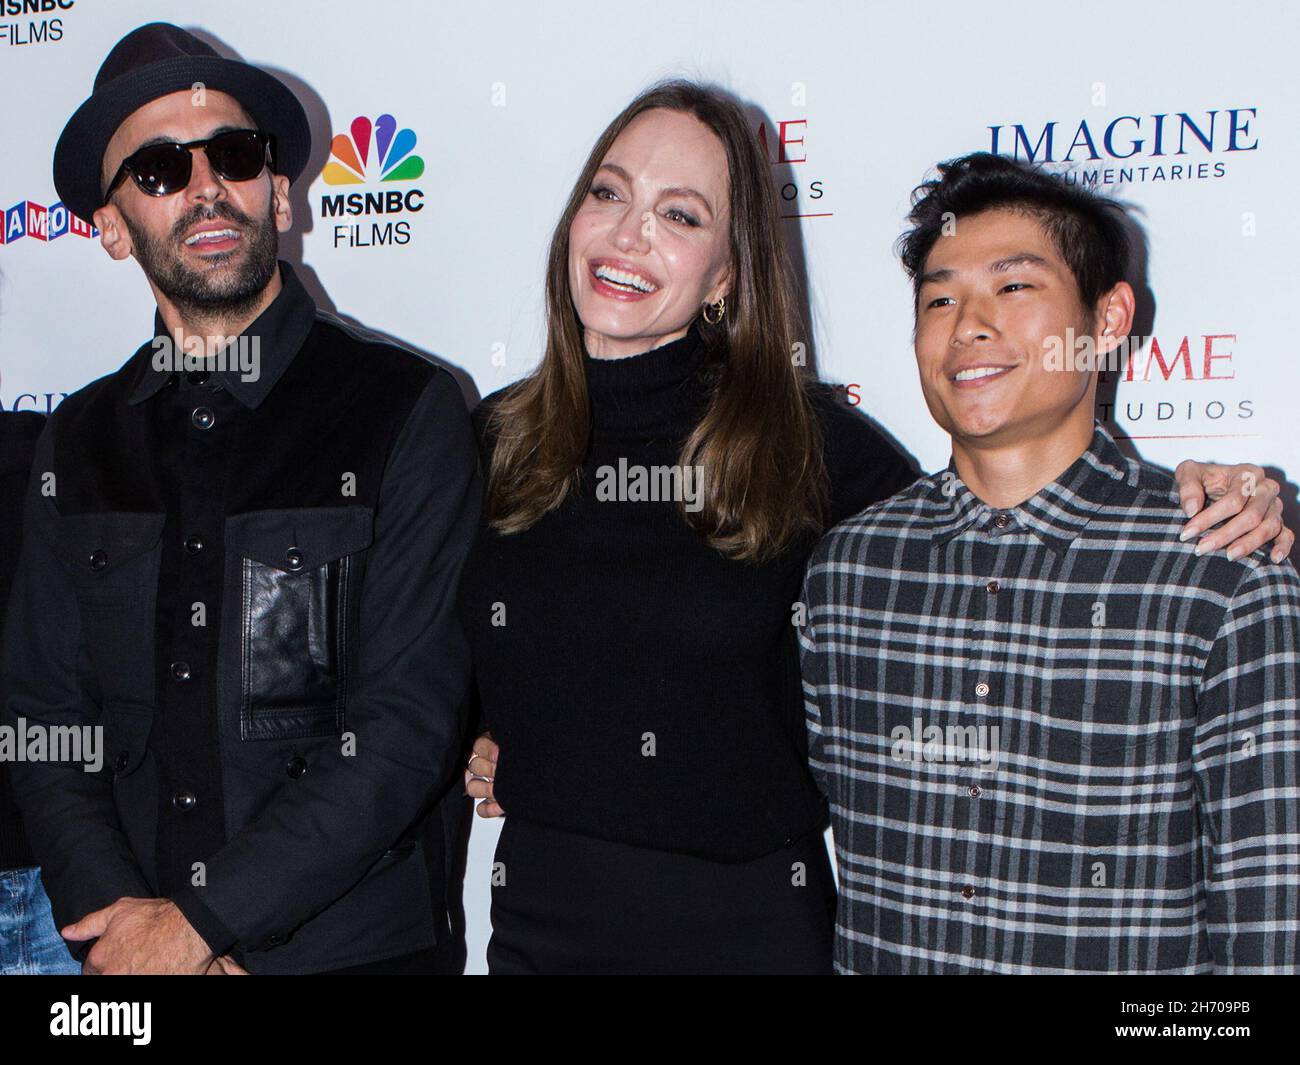 Los Angeles, United States. 18th Nov, 2021. LOS ANGELES, CALIFORNIA, USA - NOVEMBER 18: Street artist JR, actress Angelina Jolie and Pax Thien Jolie-Pitt arrive at the Los Angeles Premiere Of MSNBC Films' 'Paper & Glue: A JR Project' held at the Museum Of Tolerance on November 18, 2021 in Los Angeles, California, United States. (Photo by Rudy Torres/Image Press Agency) Credit: Image Press Agency/Alamy Live News Stock Photo